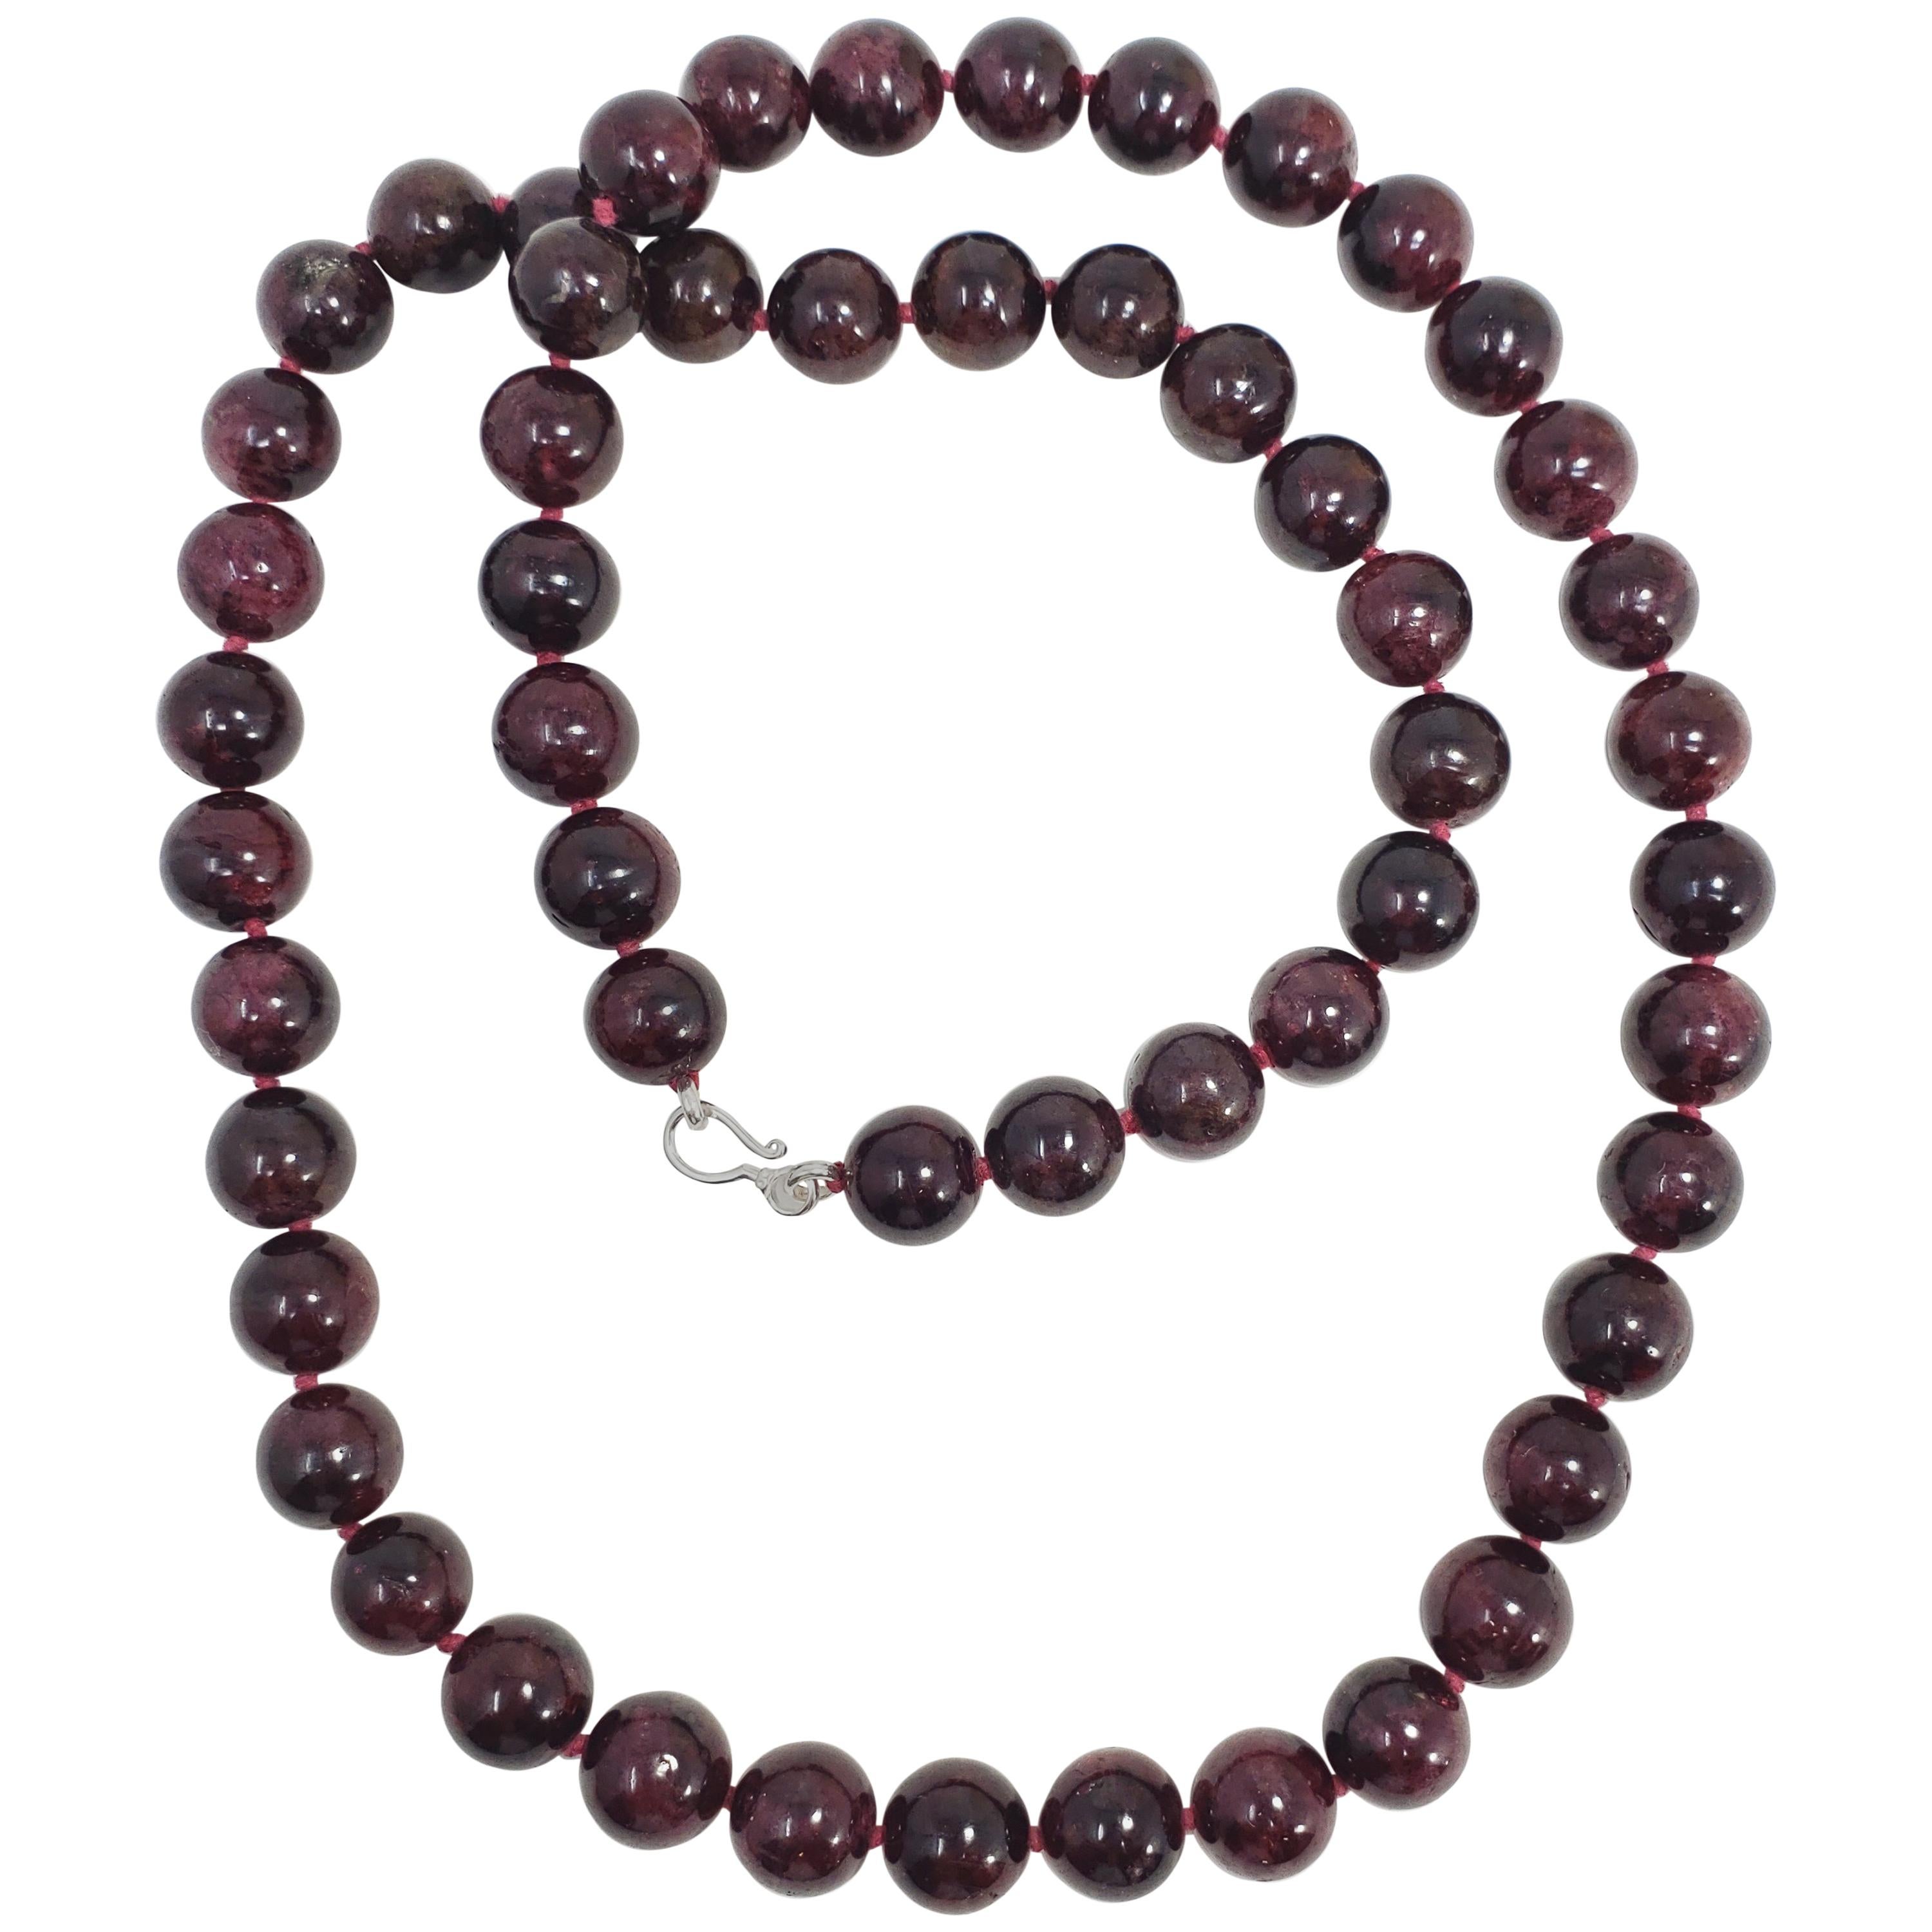 Garnet 12.5mm Bead Knotted String Necklace, Sterling Silver S Hook Clasp